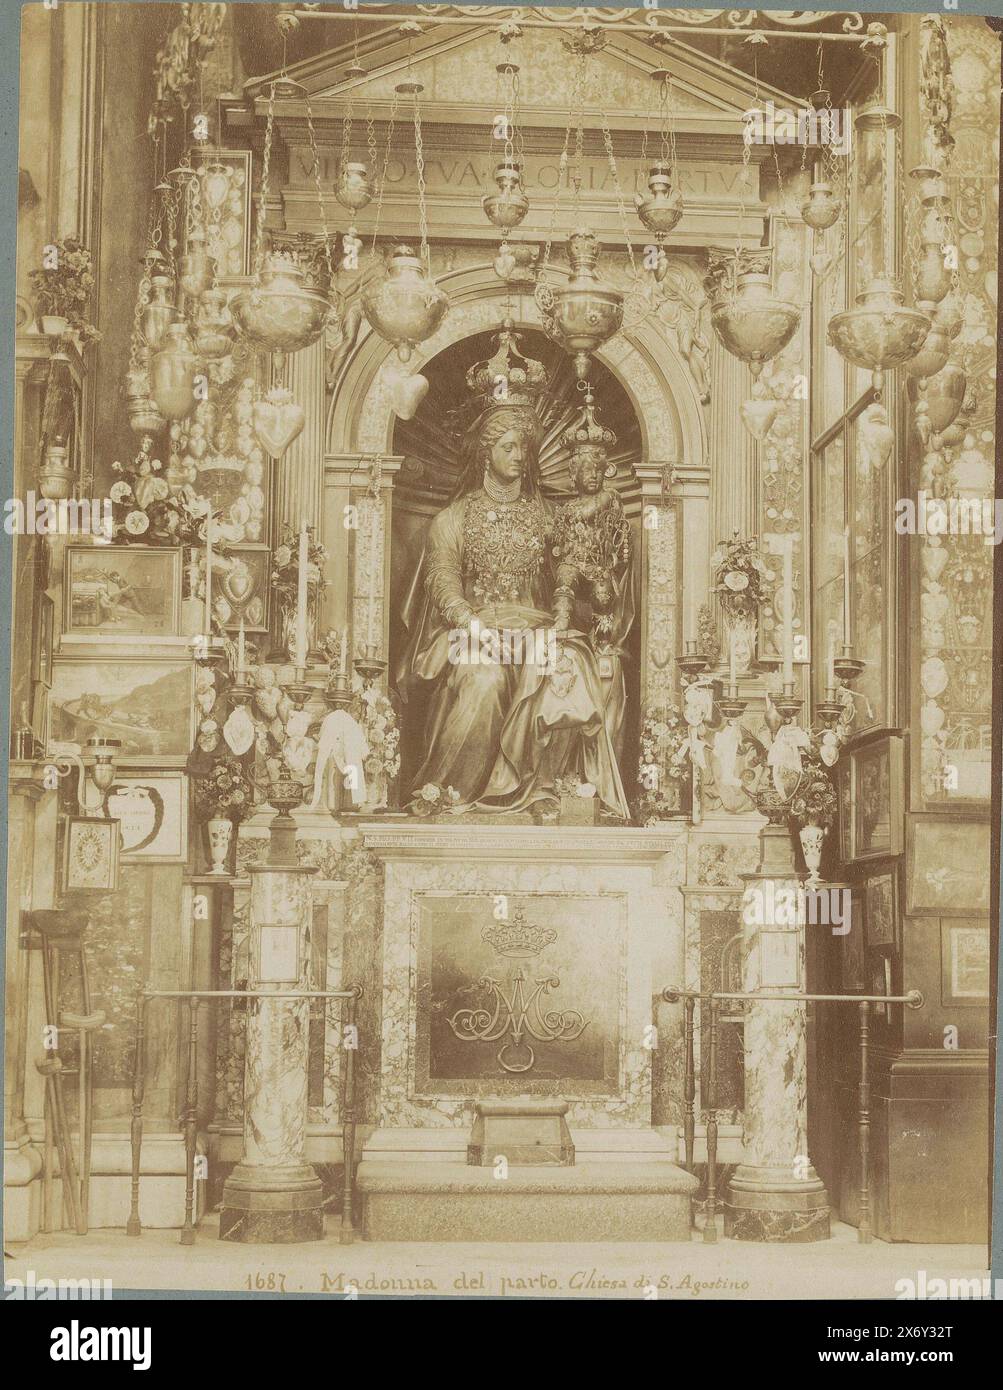 Altar with sculpture of Madonna and Child in the Basilica of Sant'Agostino in Rome, Italy, Madonna del parto. Chiesa di S. Agostino (title on object), photograph, anonymous, after sculpture by: Jacopo Tatti Sansovino, Rome, 1851 - 1900, cardboard, albumen print, height, 355 mm × width, 254 mm Stock Photo